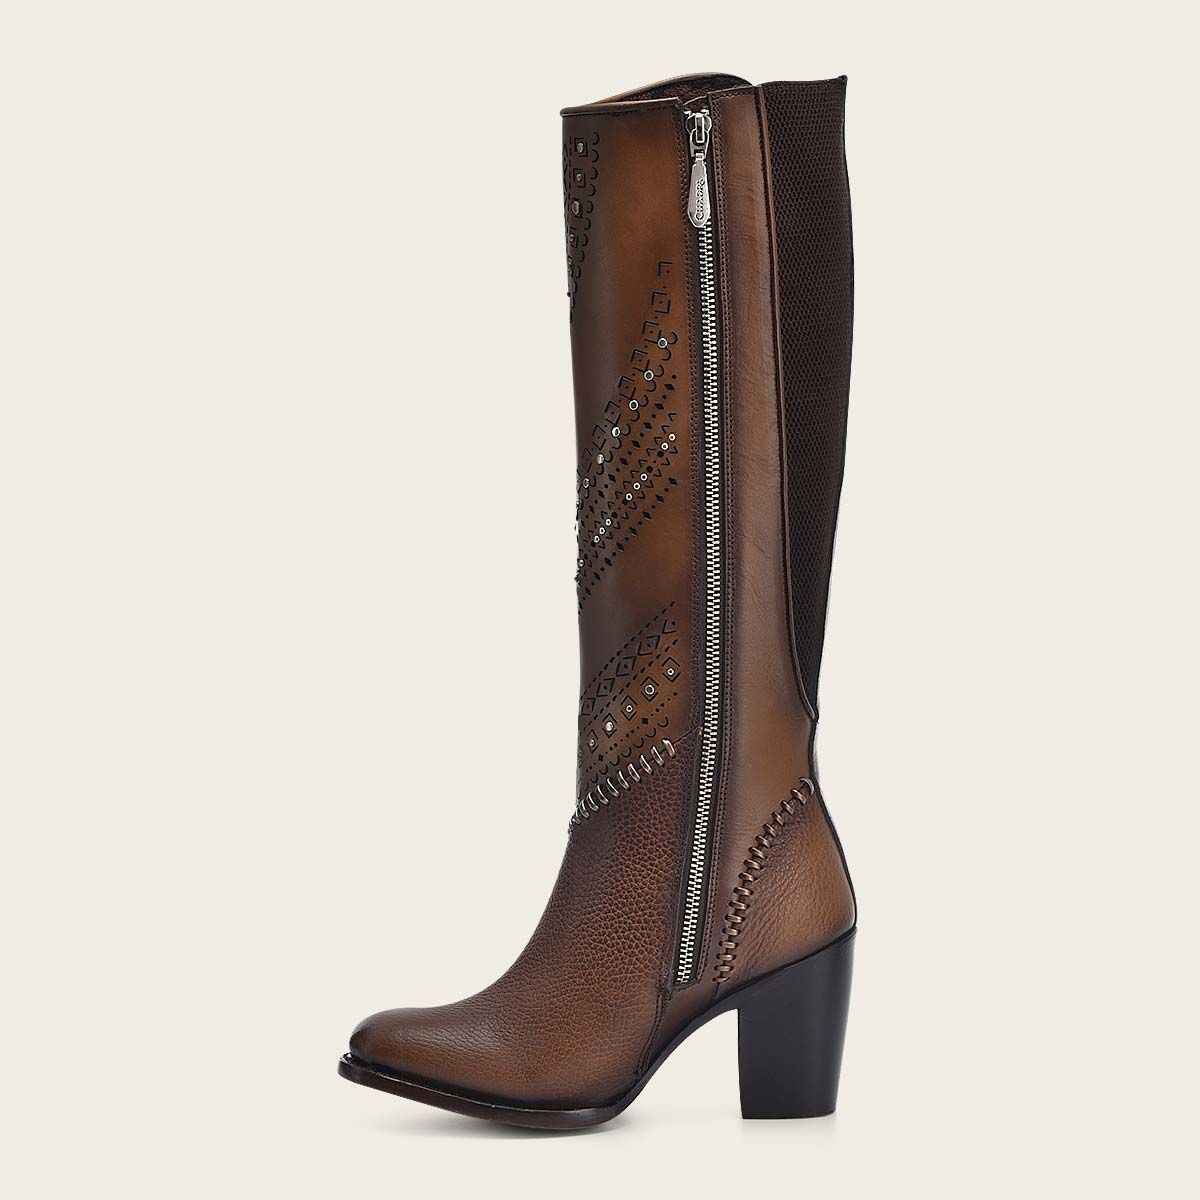 Decorated brown leather tall boot with perforations - 3W21RS - Cuadra Shop